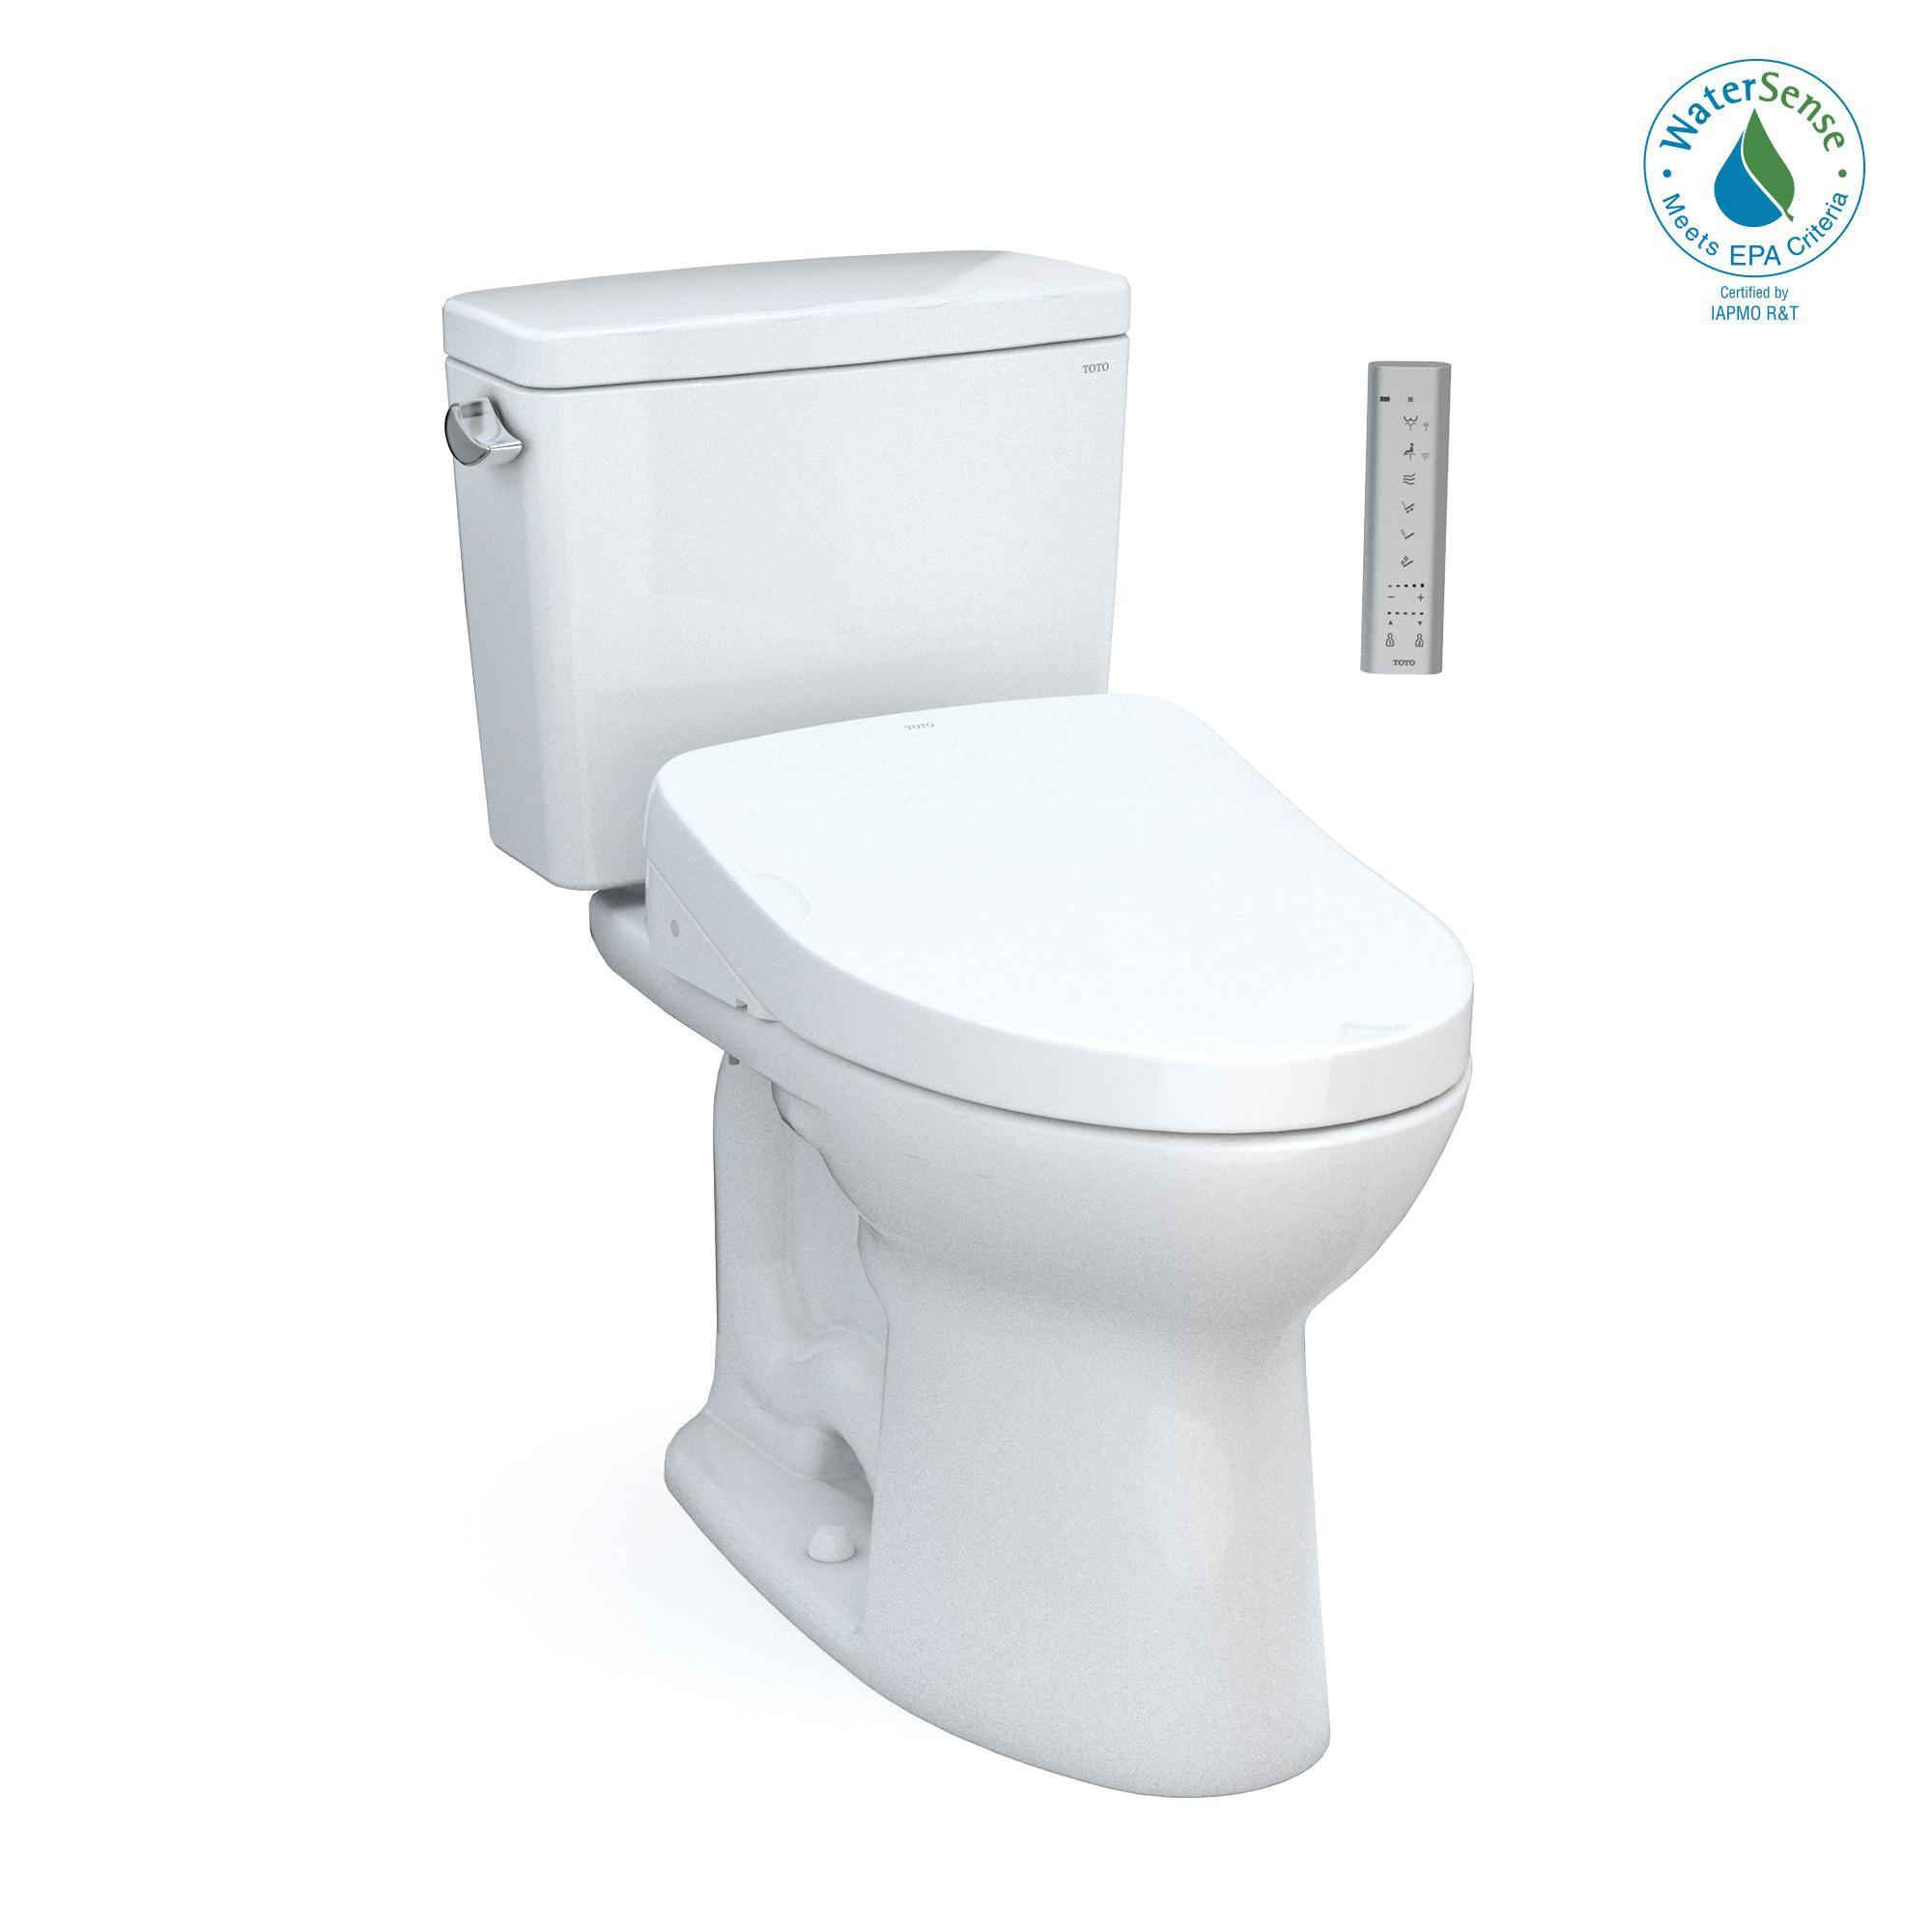 Toto® MW7763056CEFG#01 Universal Height Transitional 2-Piece Toilet With SW3056AT40#01/S550e Bidet Seat, Drake® WASHLET®+, Elongated Bowl, 16-1/8 in H Rim, 12 in Rough-In, 1.28 gpf, Cotton White, Import